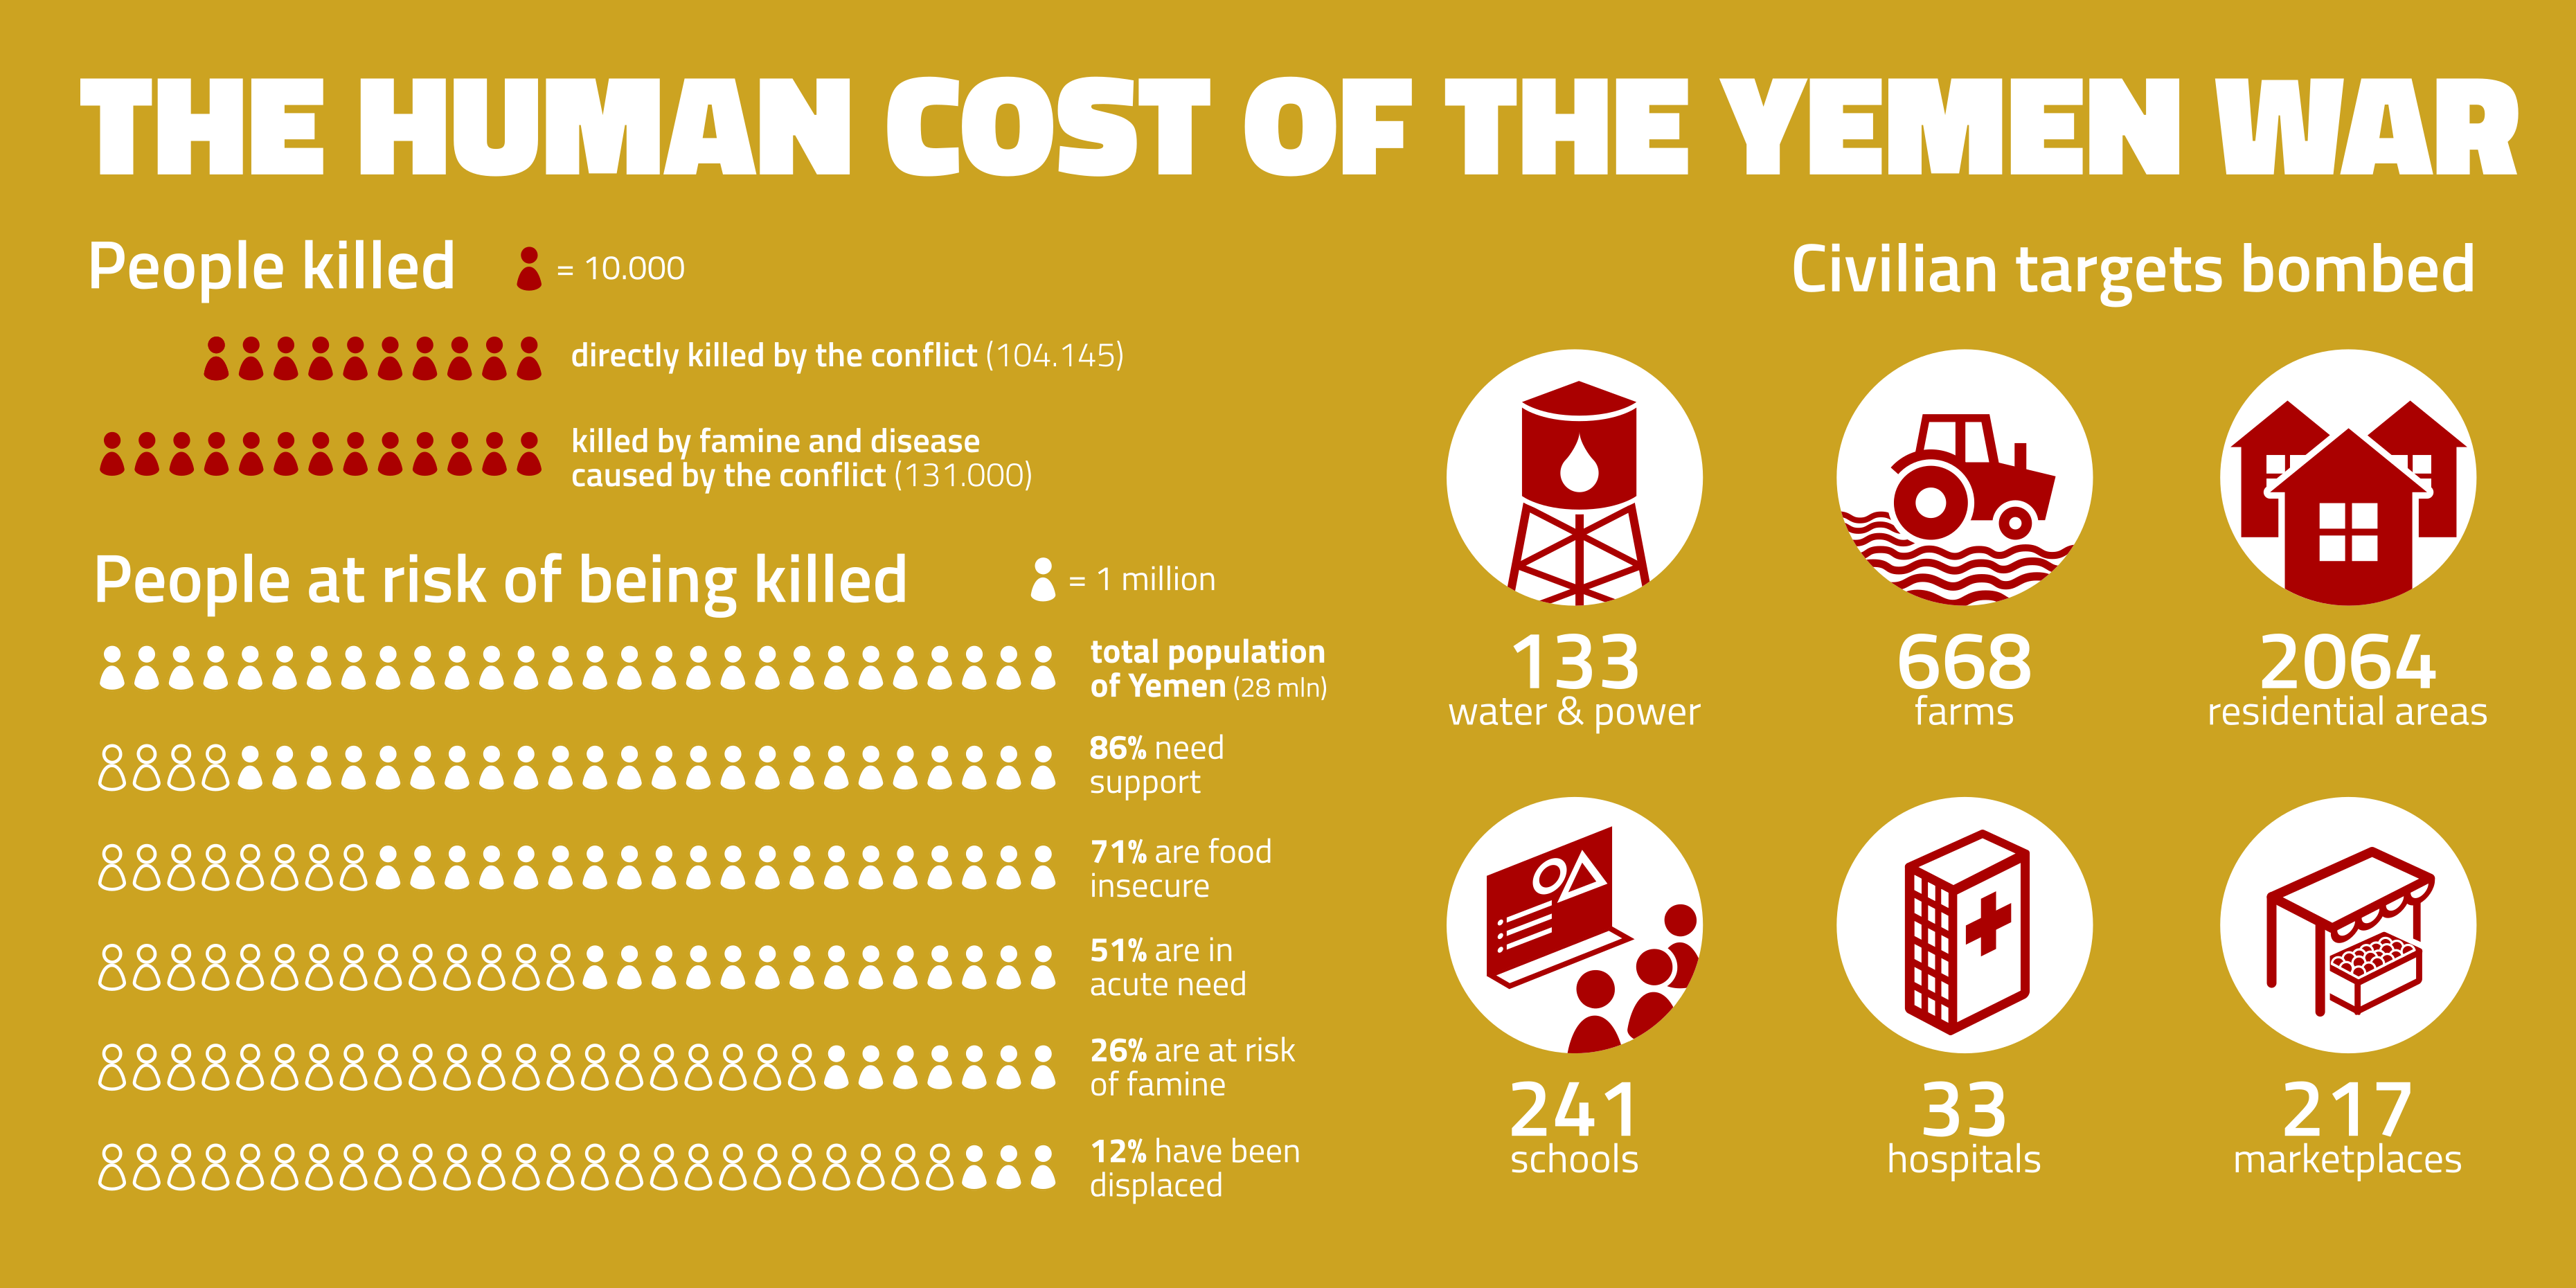 graphic explaining the human cost of the war in Yemen